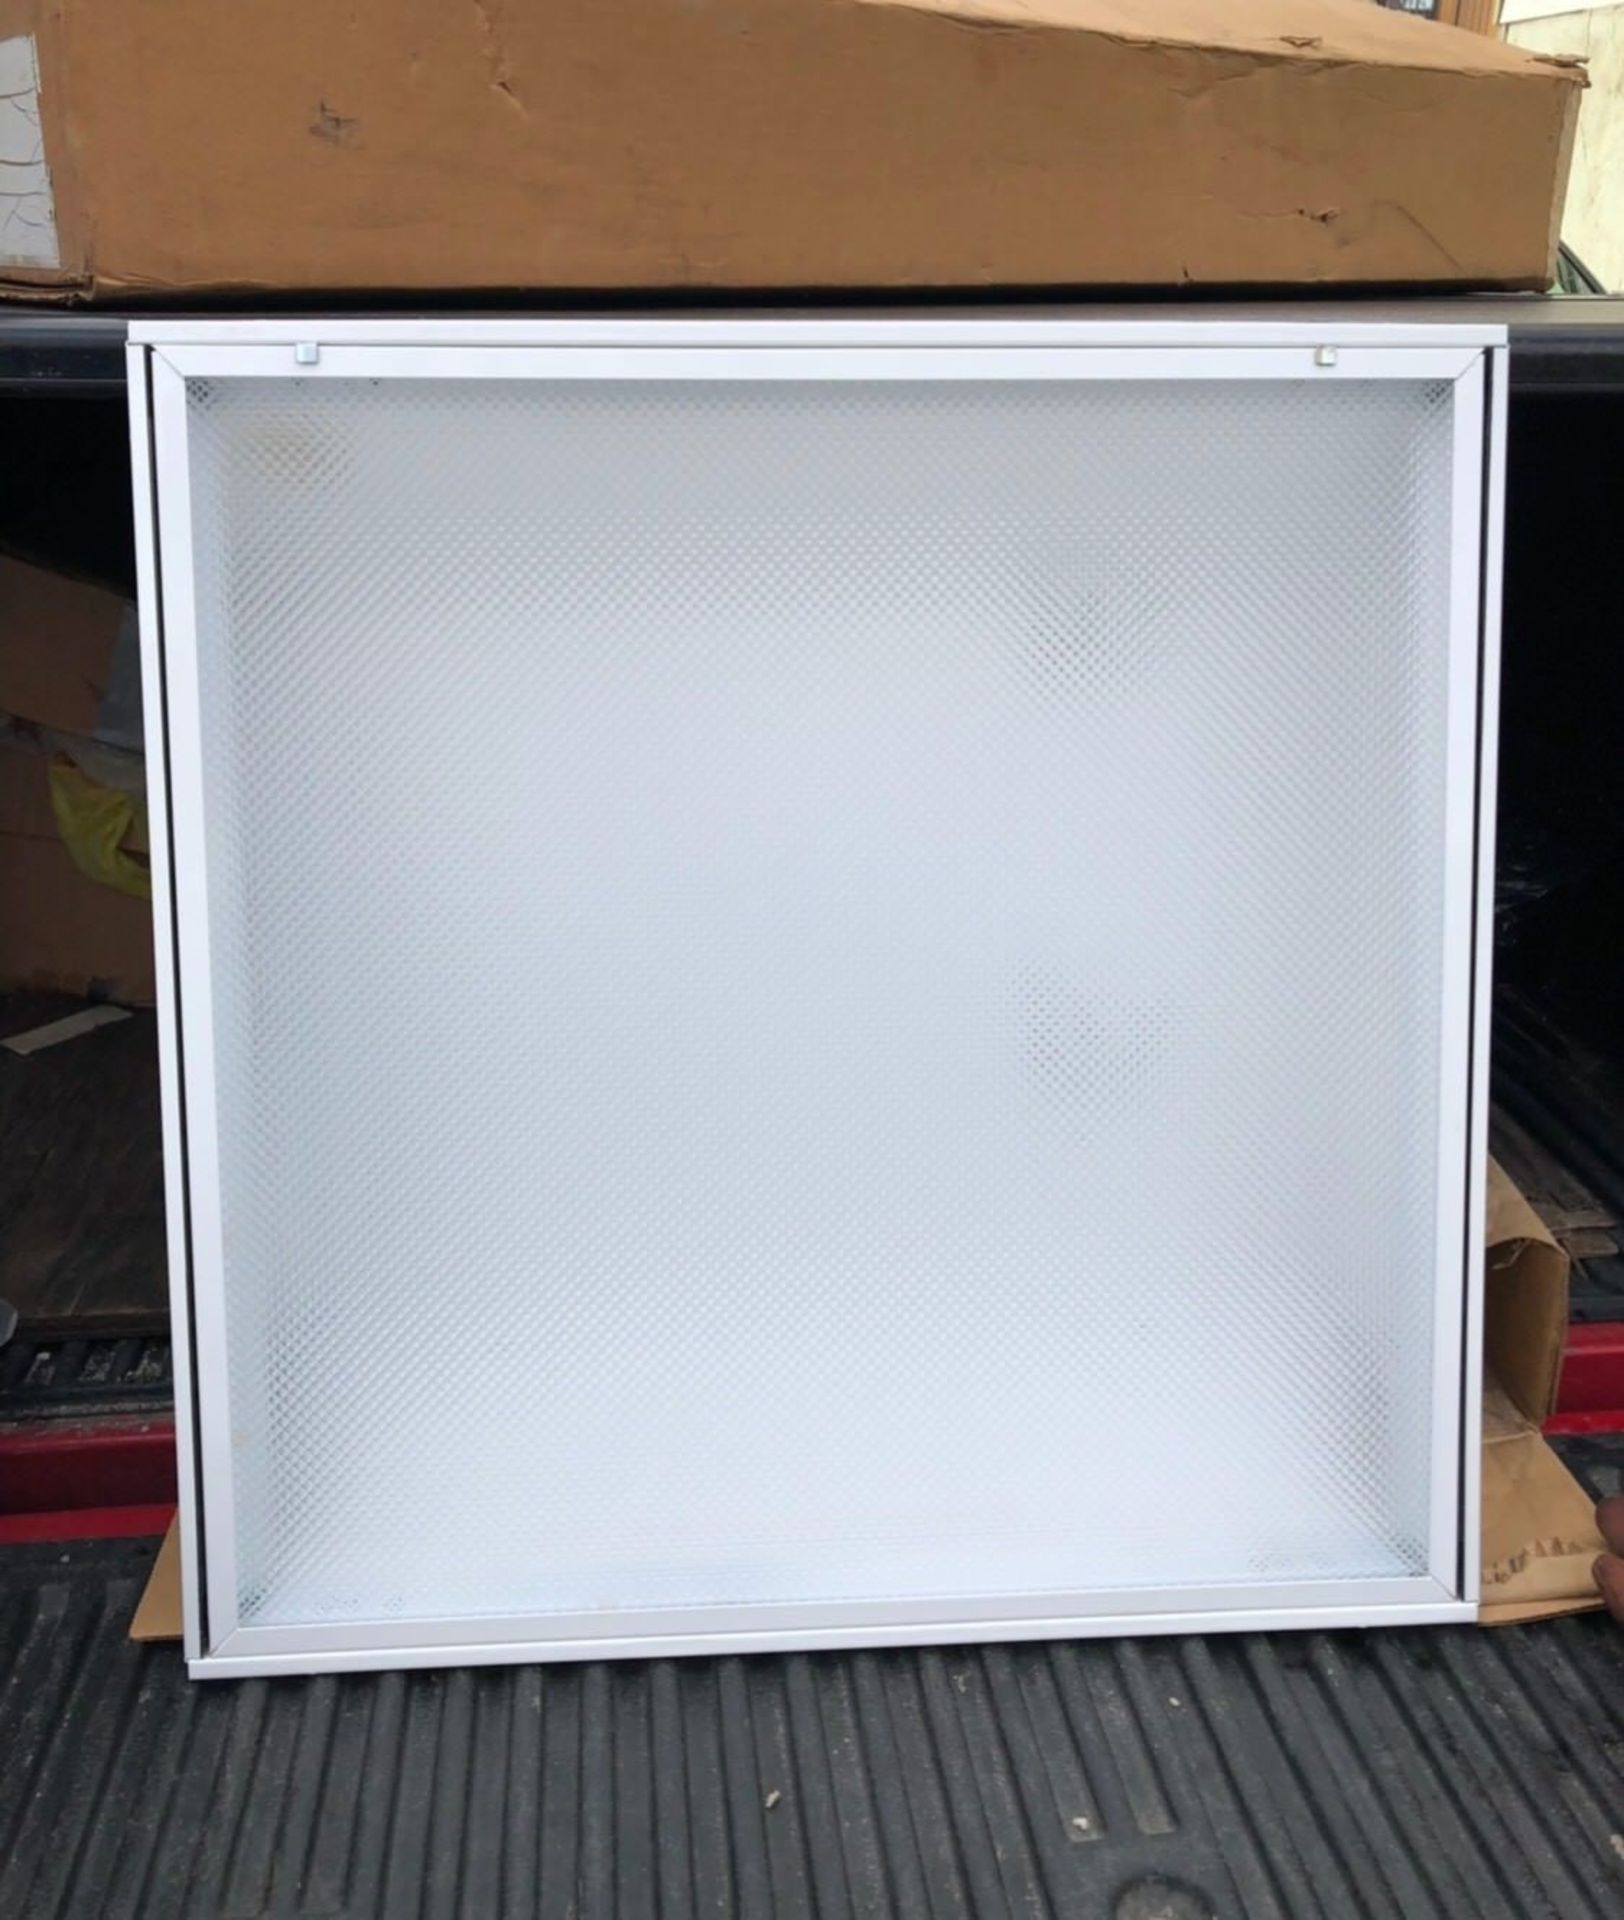 2x2 FT White Fluorescent Ceiling Daybrite Light Commercial Square Ballast - Image 4 of 4